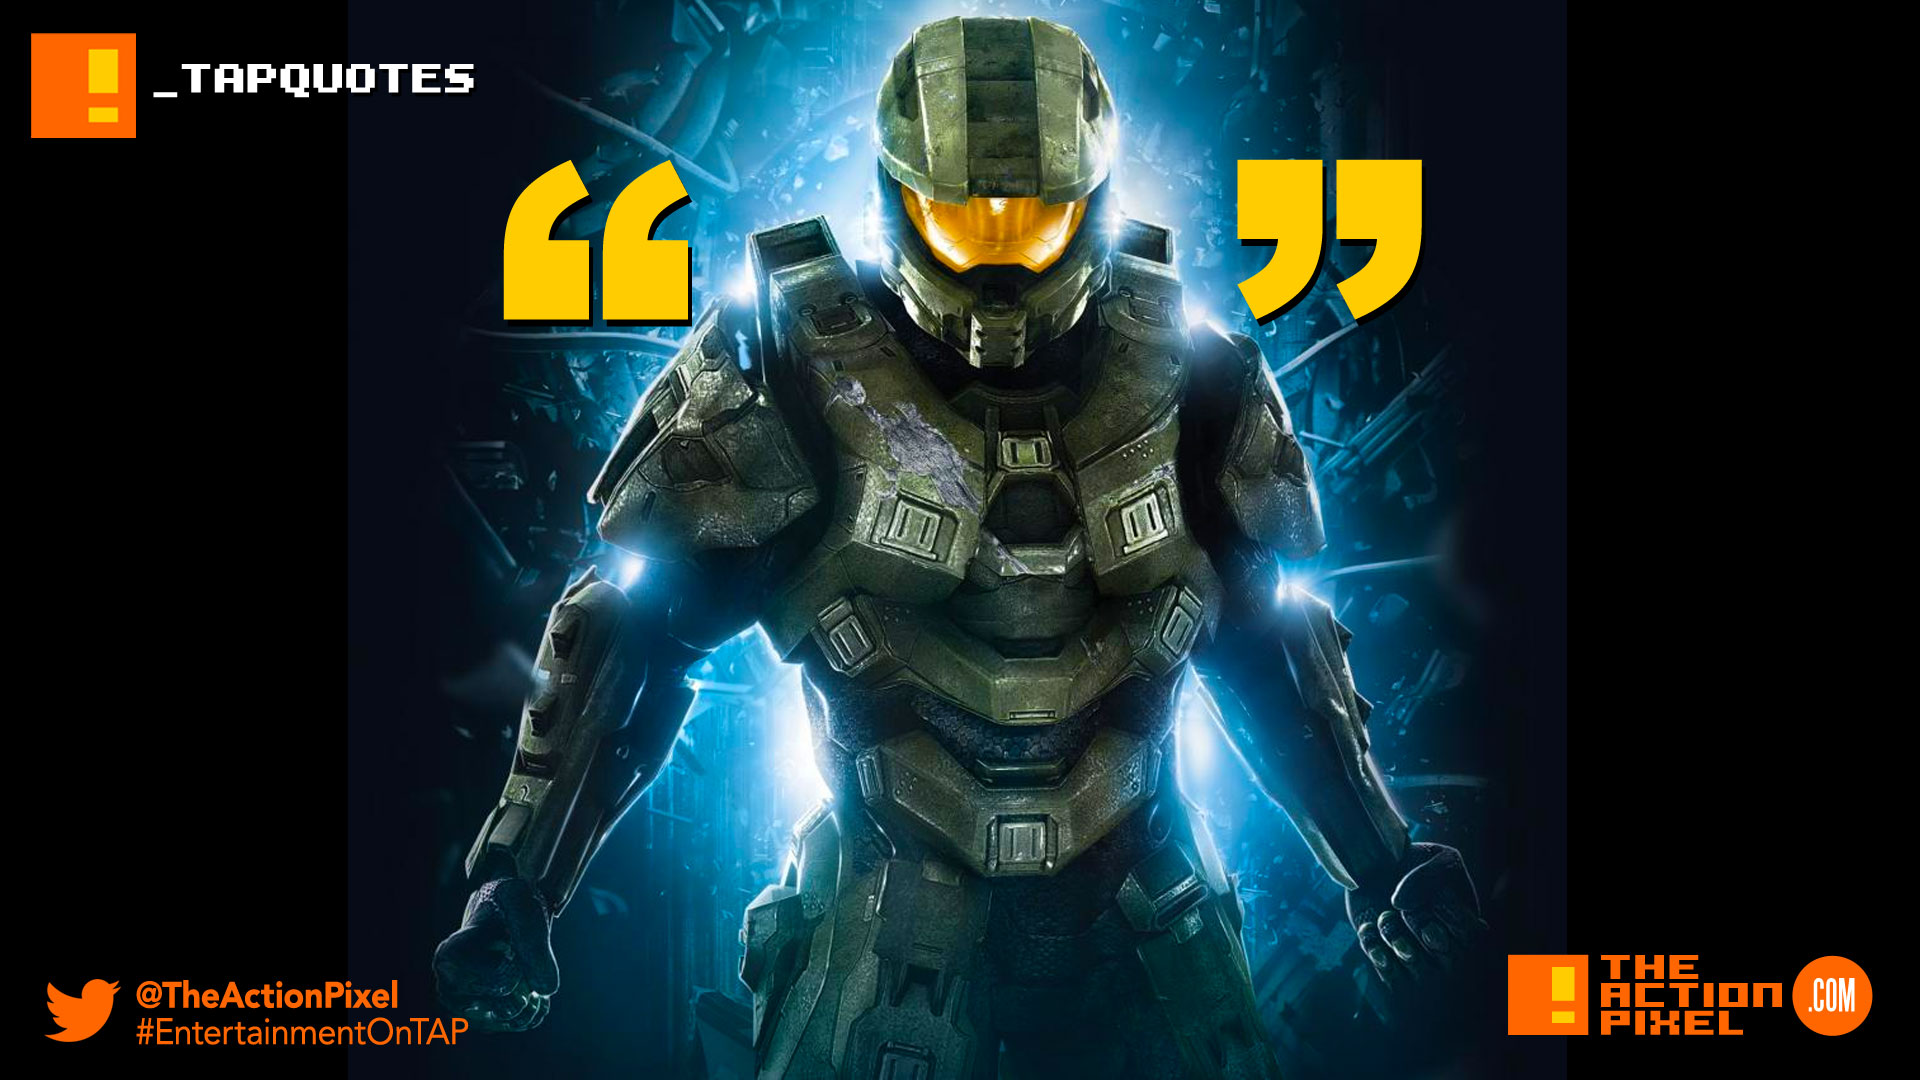 a hero need not speak. when he is gone the world will speak for him, halo, spartan 117, spartan, bungie,the action pixel,entertainment on tap, tap quotes, tap quote, quote of the day, quote,gaming,